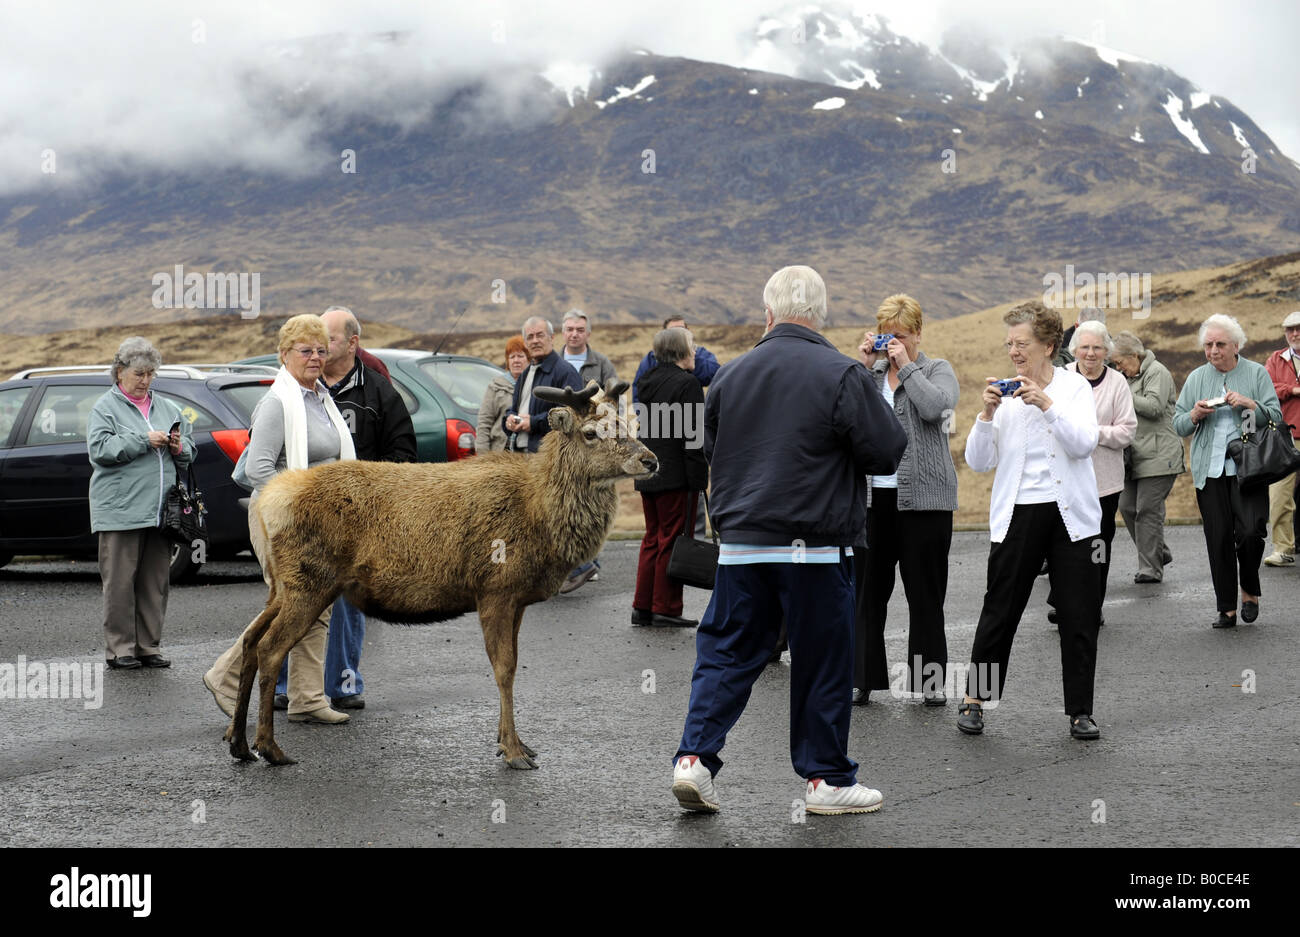 A WILD DEER MINGLES WITH TOURISTS IN A LAYBY ON THE A82 IN THE GRAMPIAN MOUNTAINS NEAR GLENCOE,SCOTLAND,UK. Stock Photo